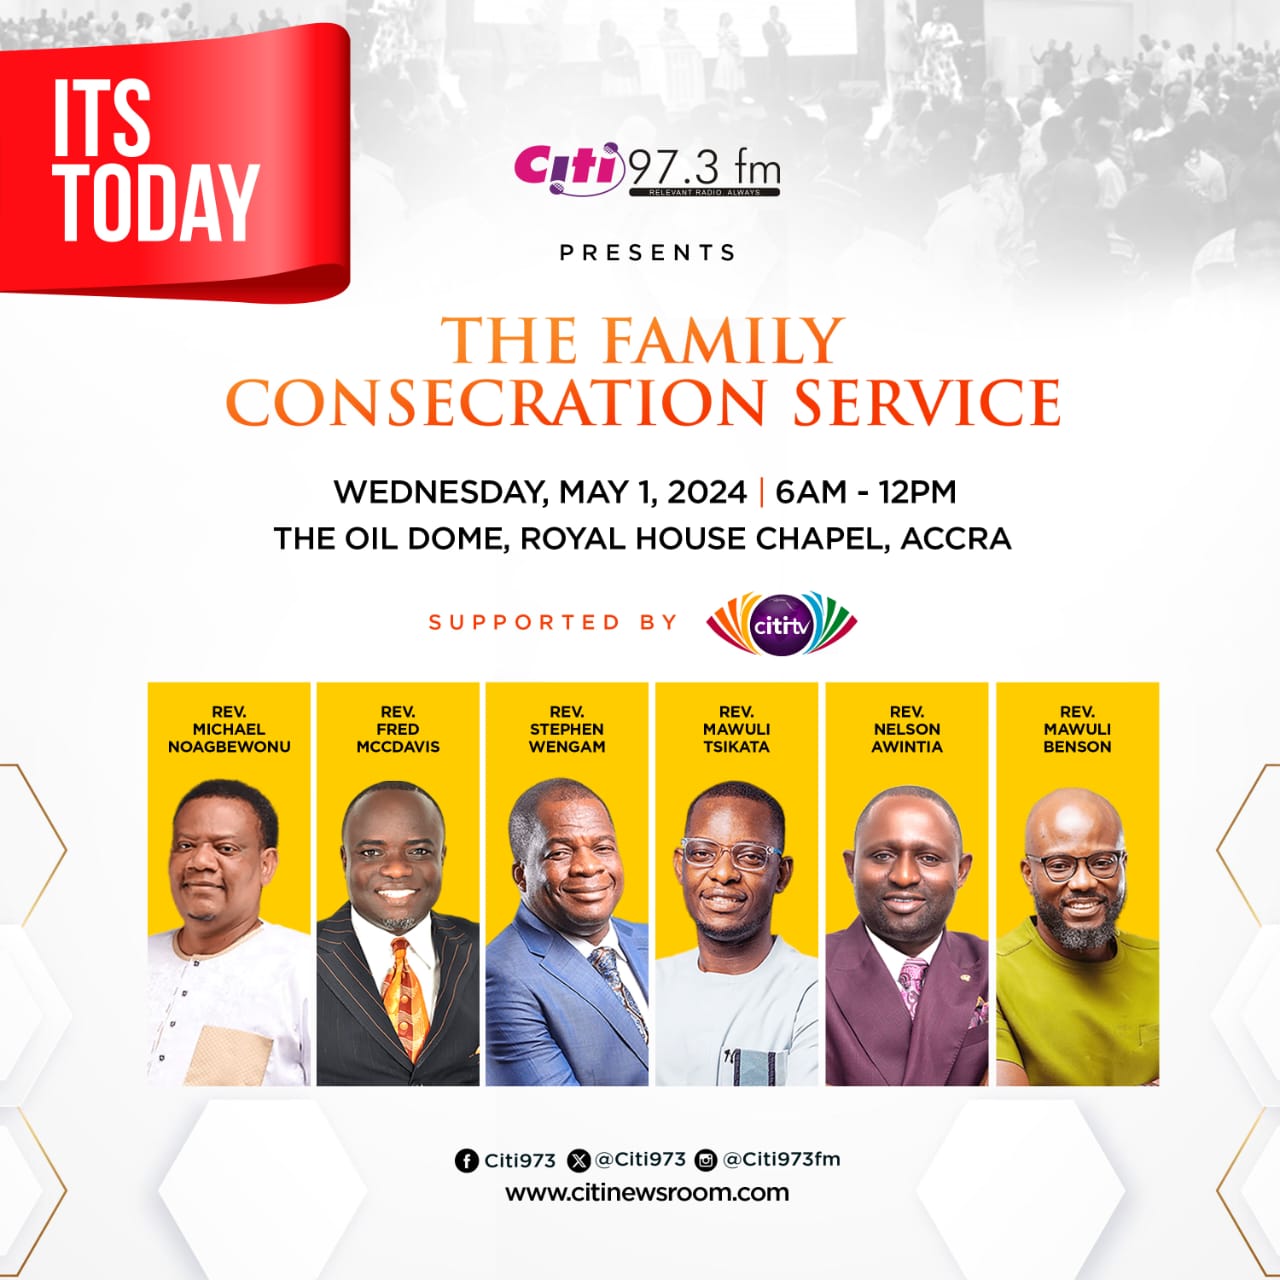 Thousands to gather for Citi TV/Citi FM’s annual Family Consecration Service